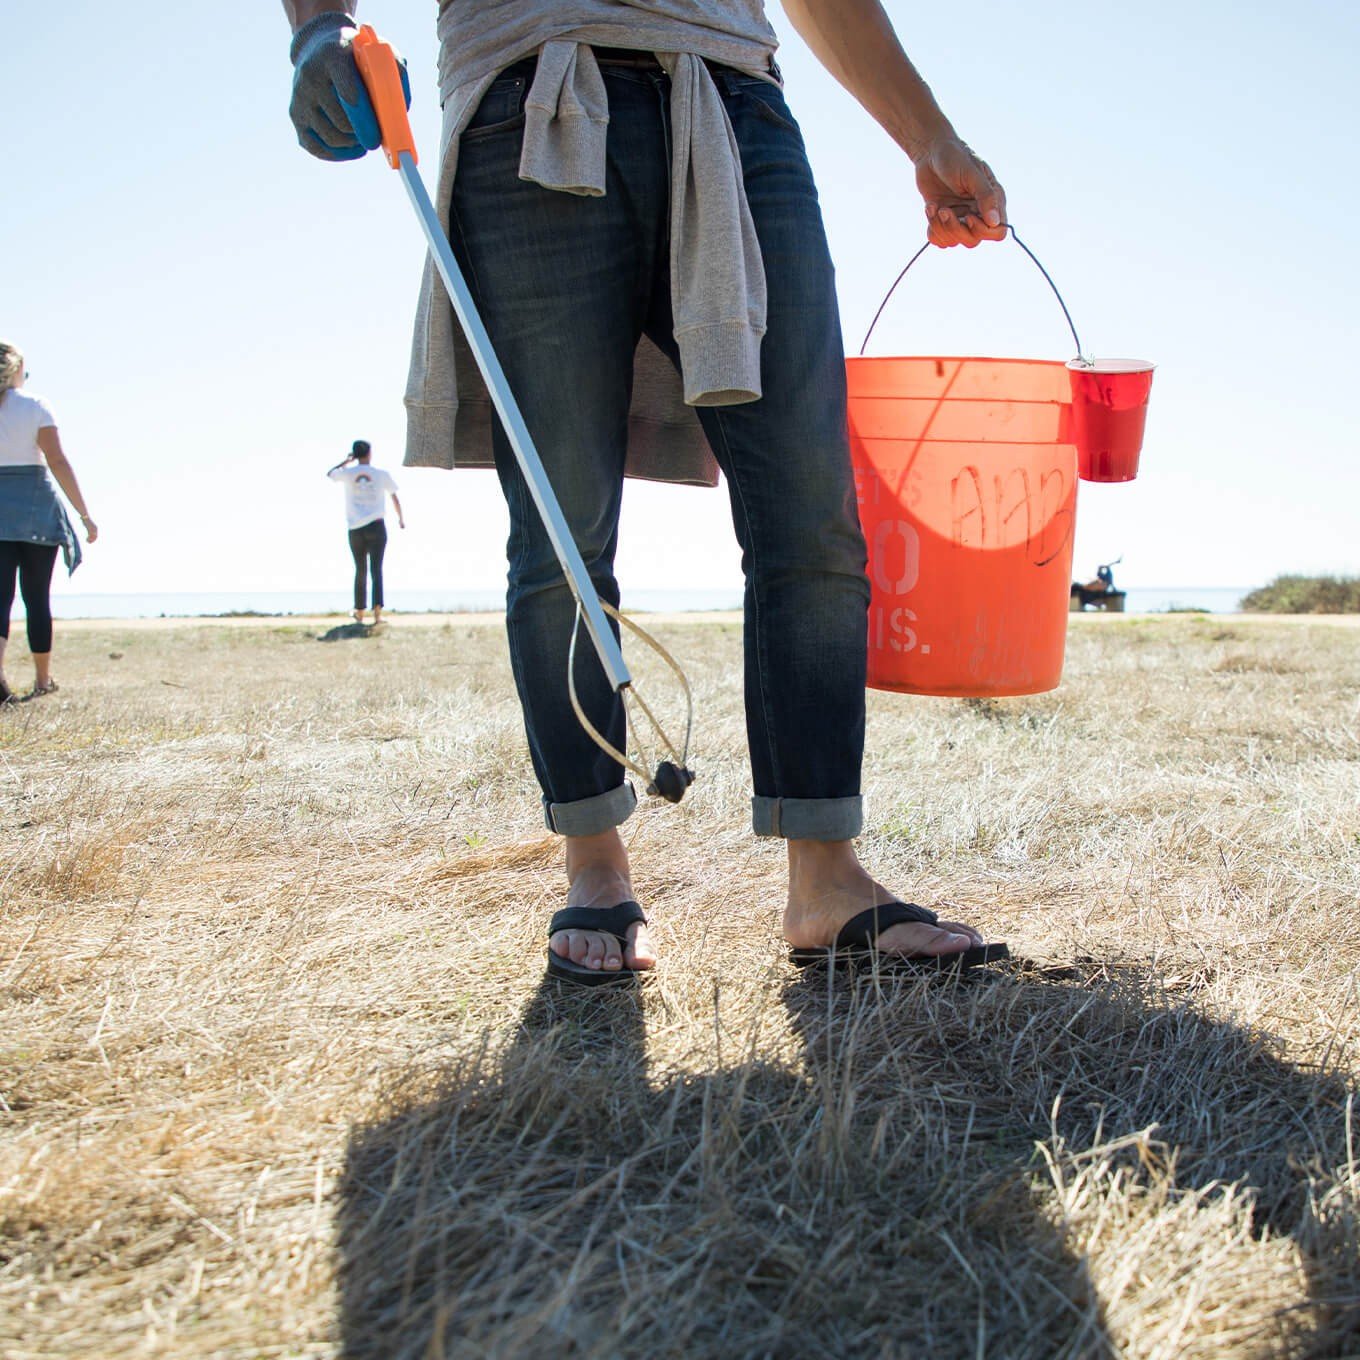 Volunteer holding grabber tool and bucket during a beach cleanup event